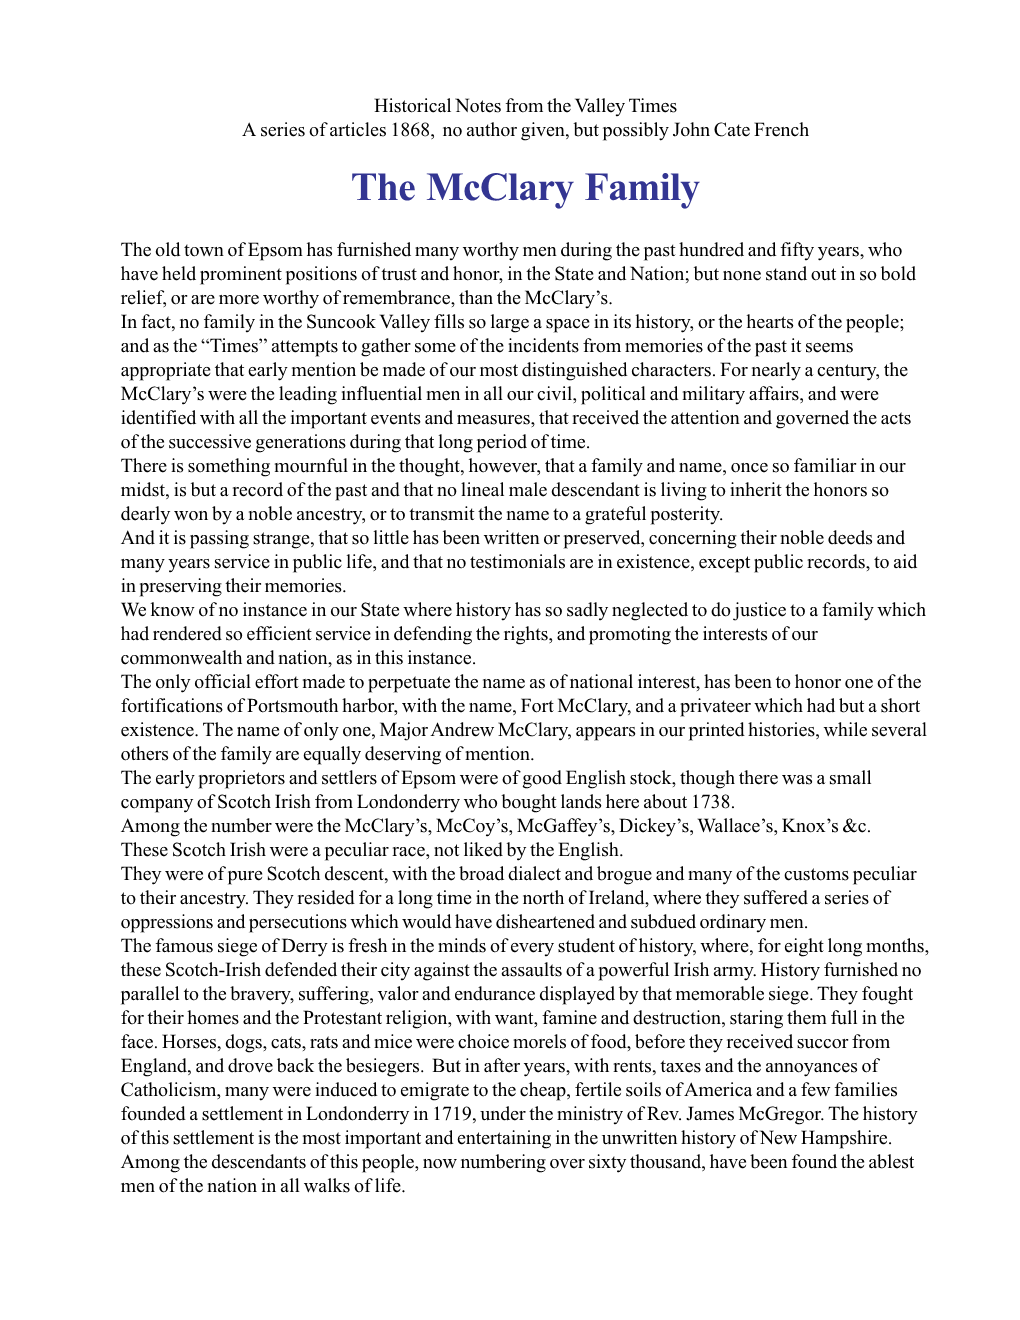 Mcclary Family from the Valley Times